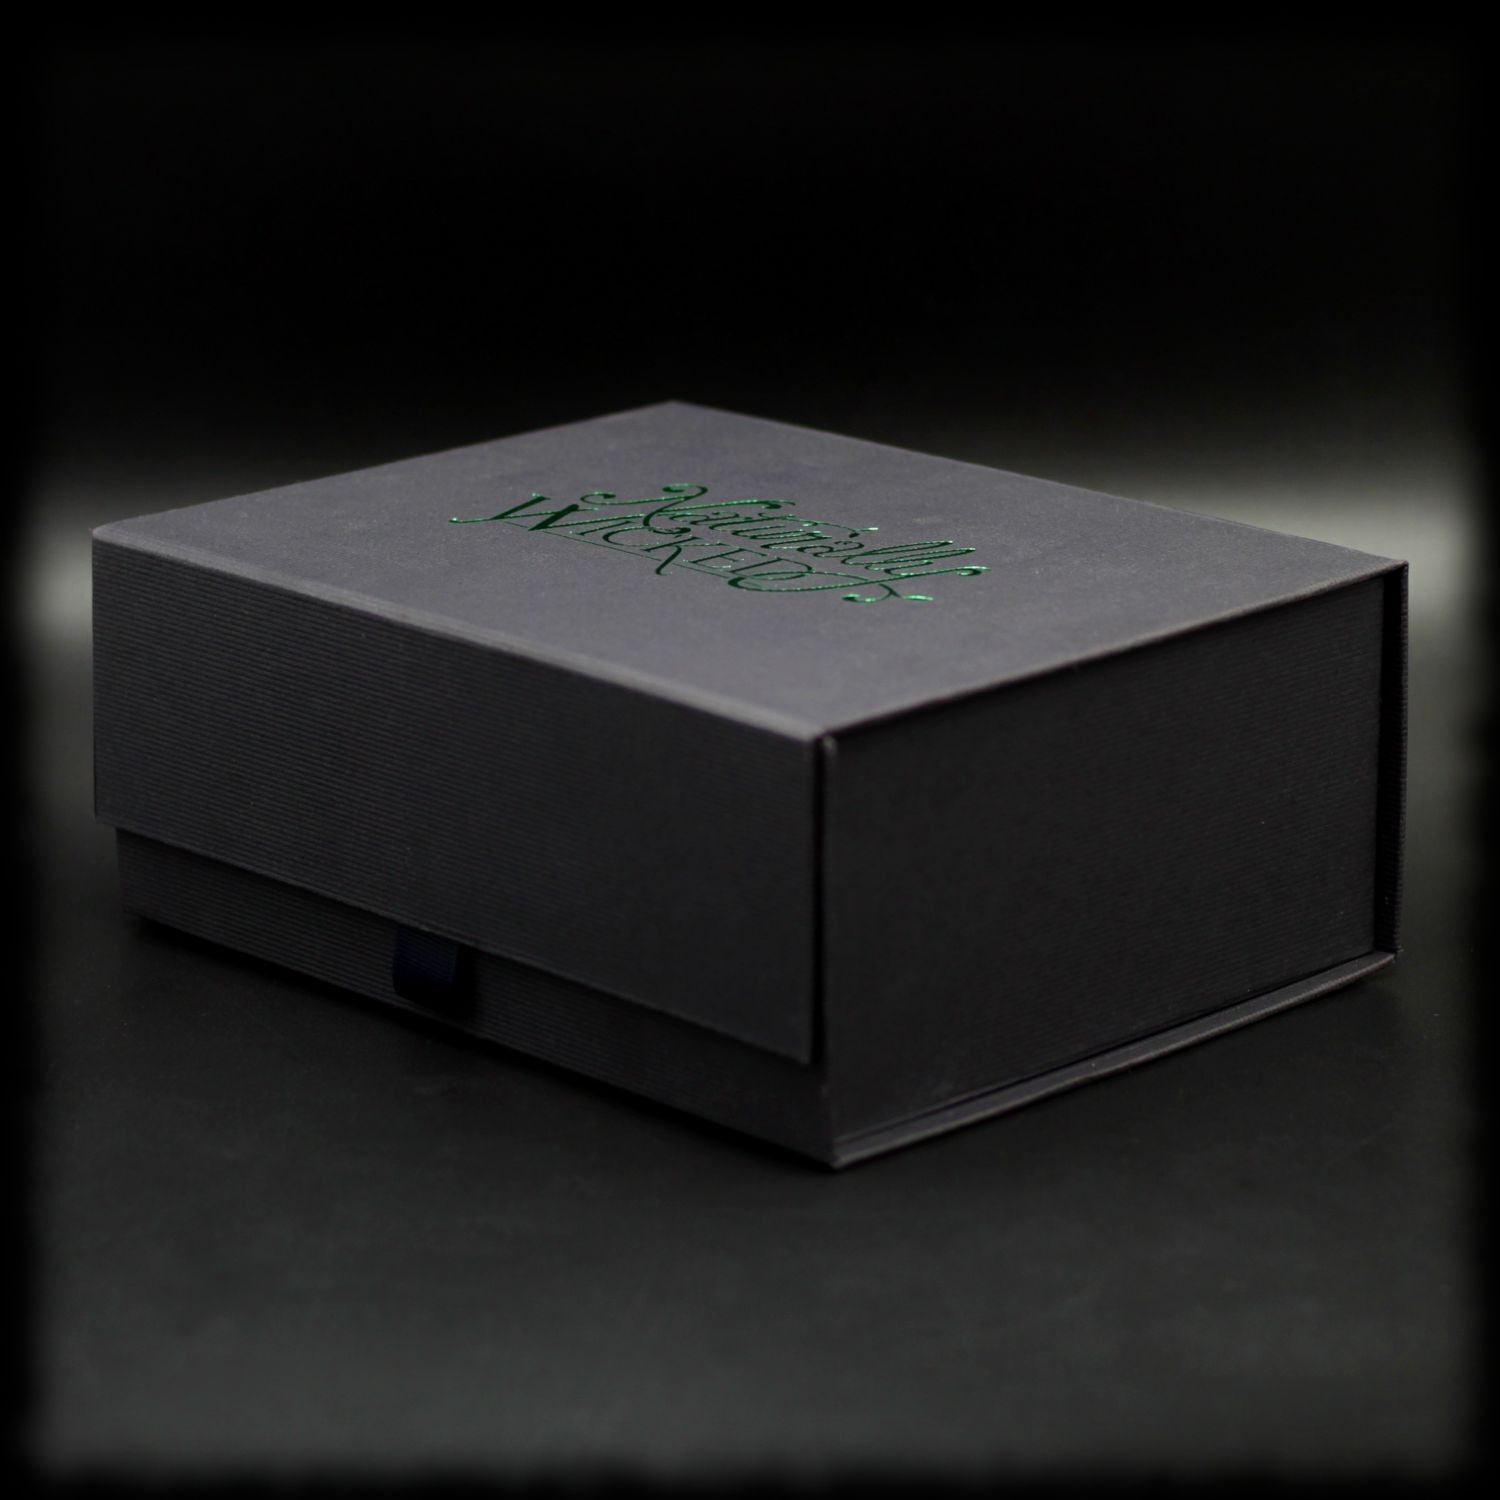 Naturally Wicked Deluxe Personalised Gift Beauty Box for Her With Green Naturally Wicked Logo On Top Of Classy Black Lid